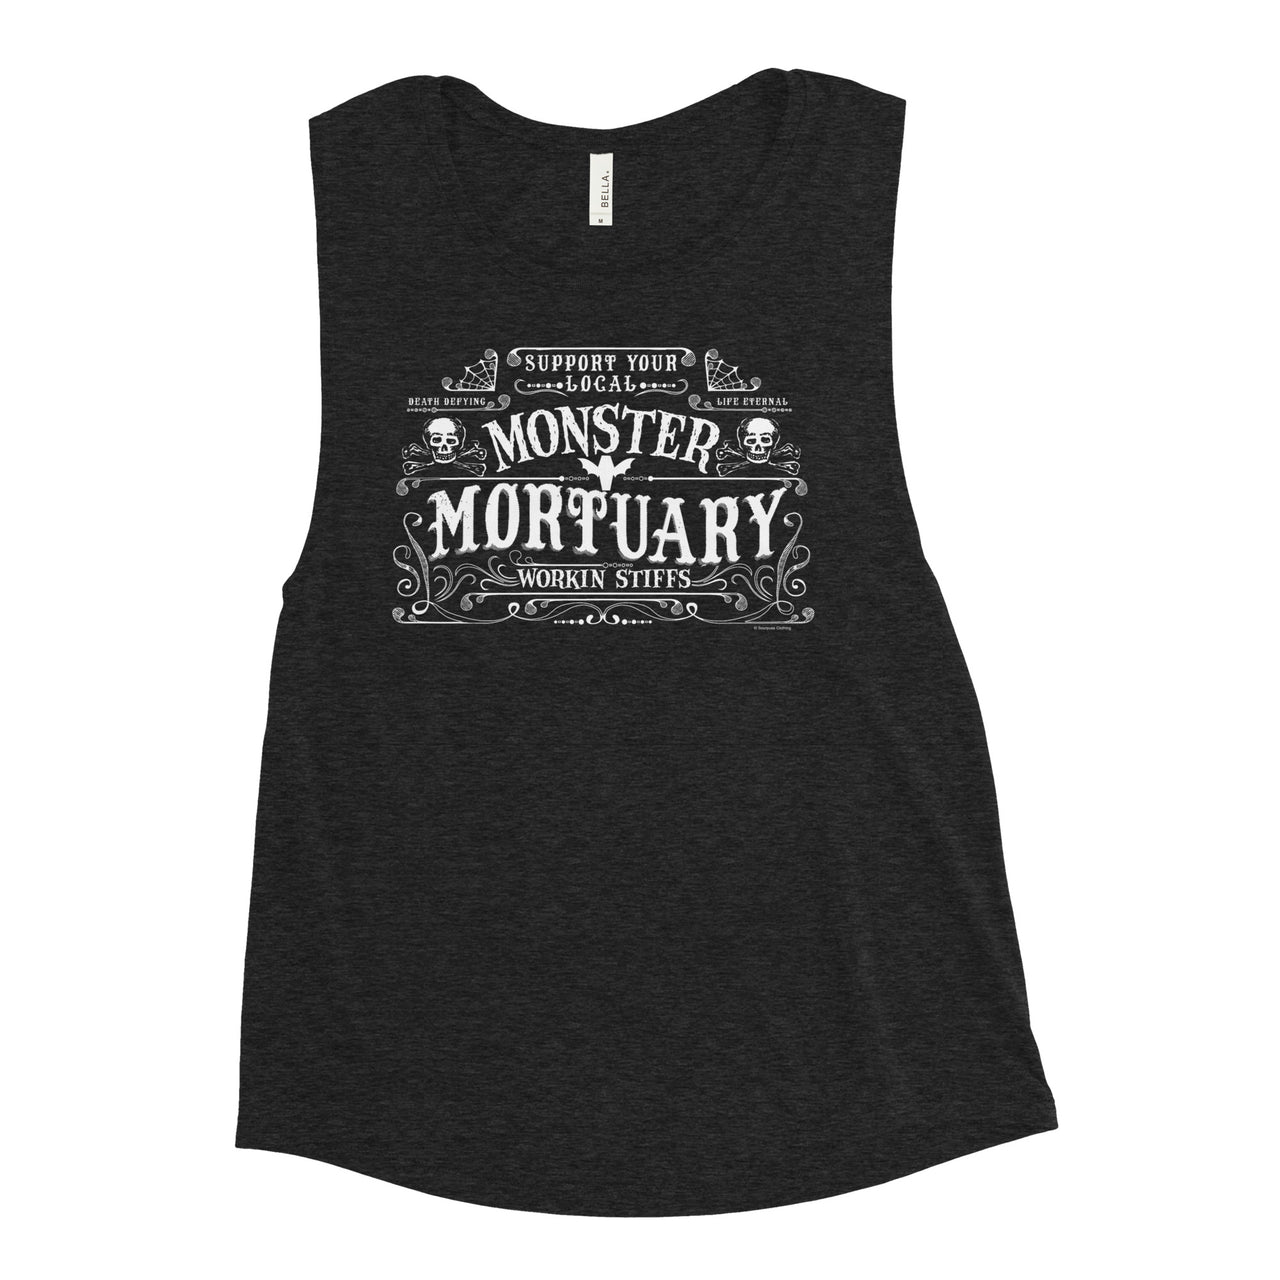 SOURPUSS MONSTER MORTUARY MUSCLE TANK TOP